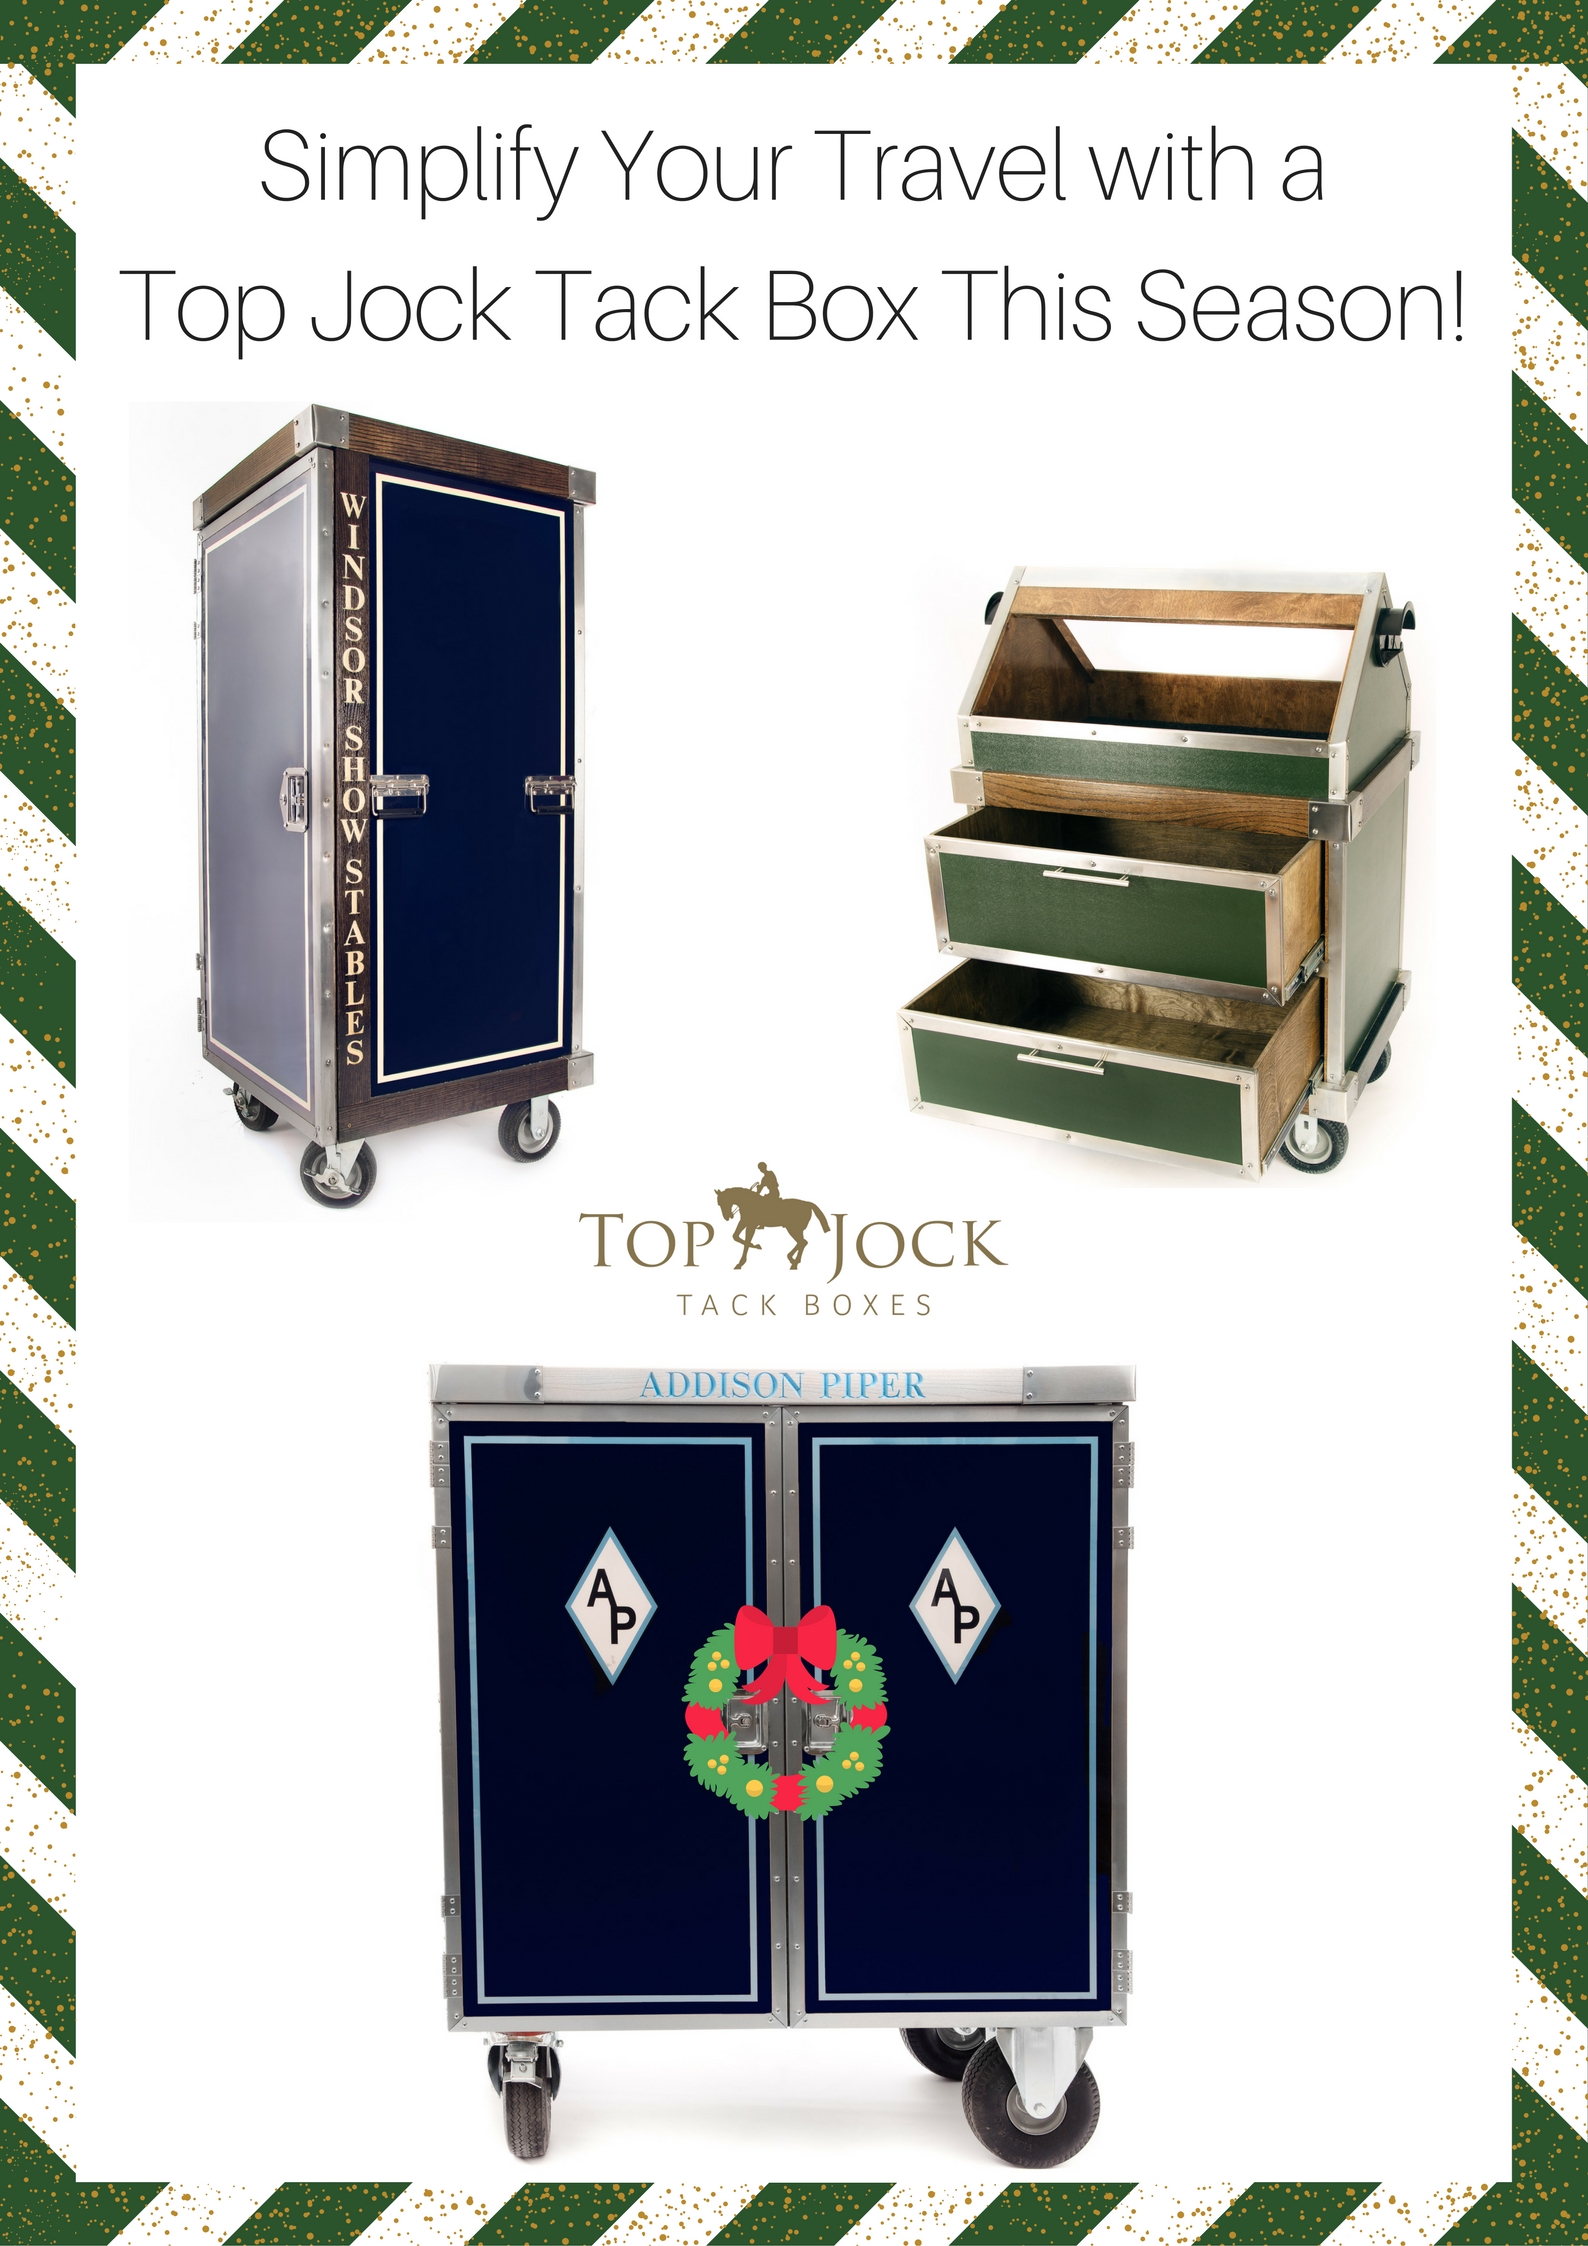 Simplify Your Travel with a Top Jock Tack Box This Season!